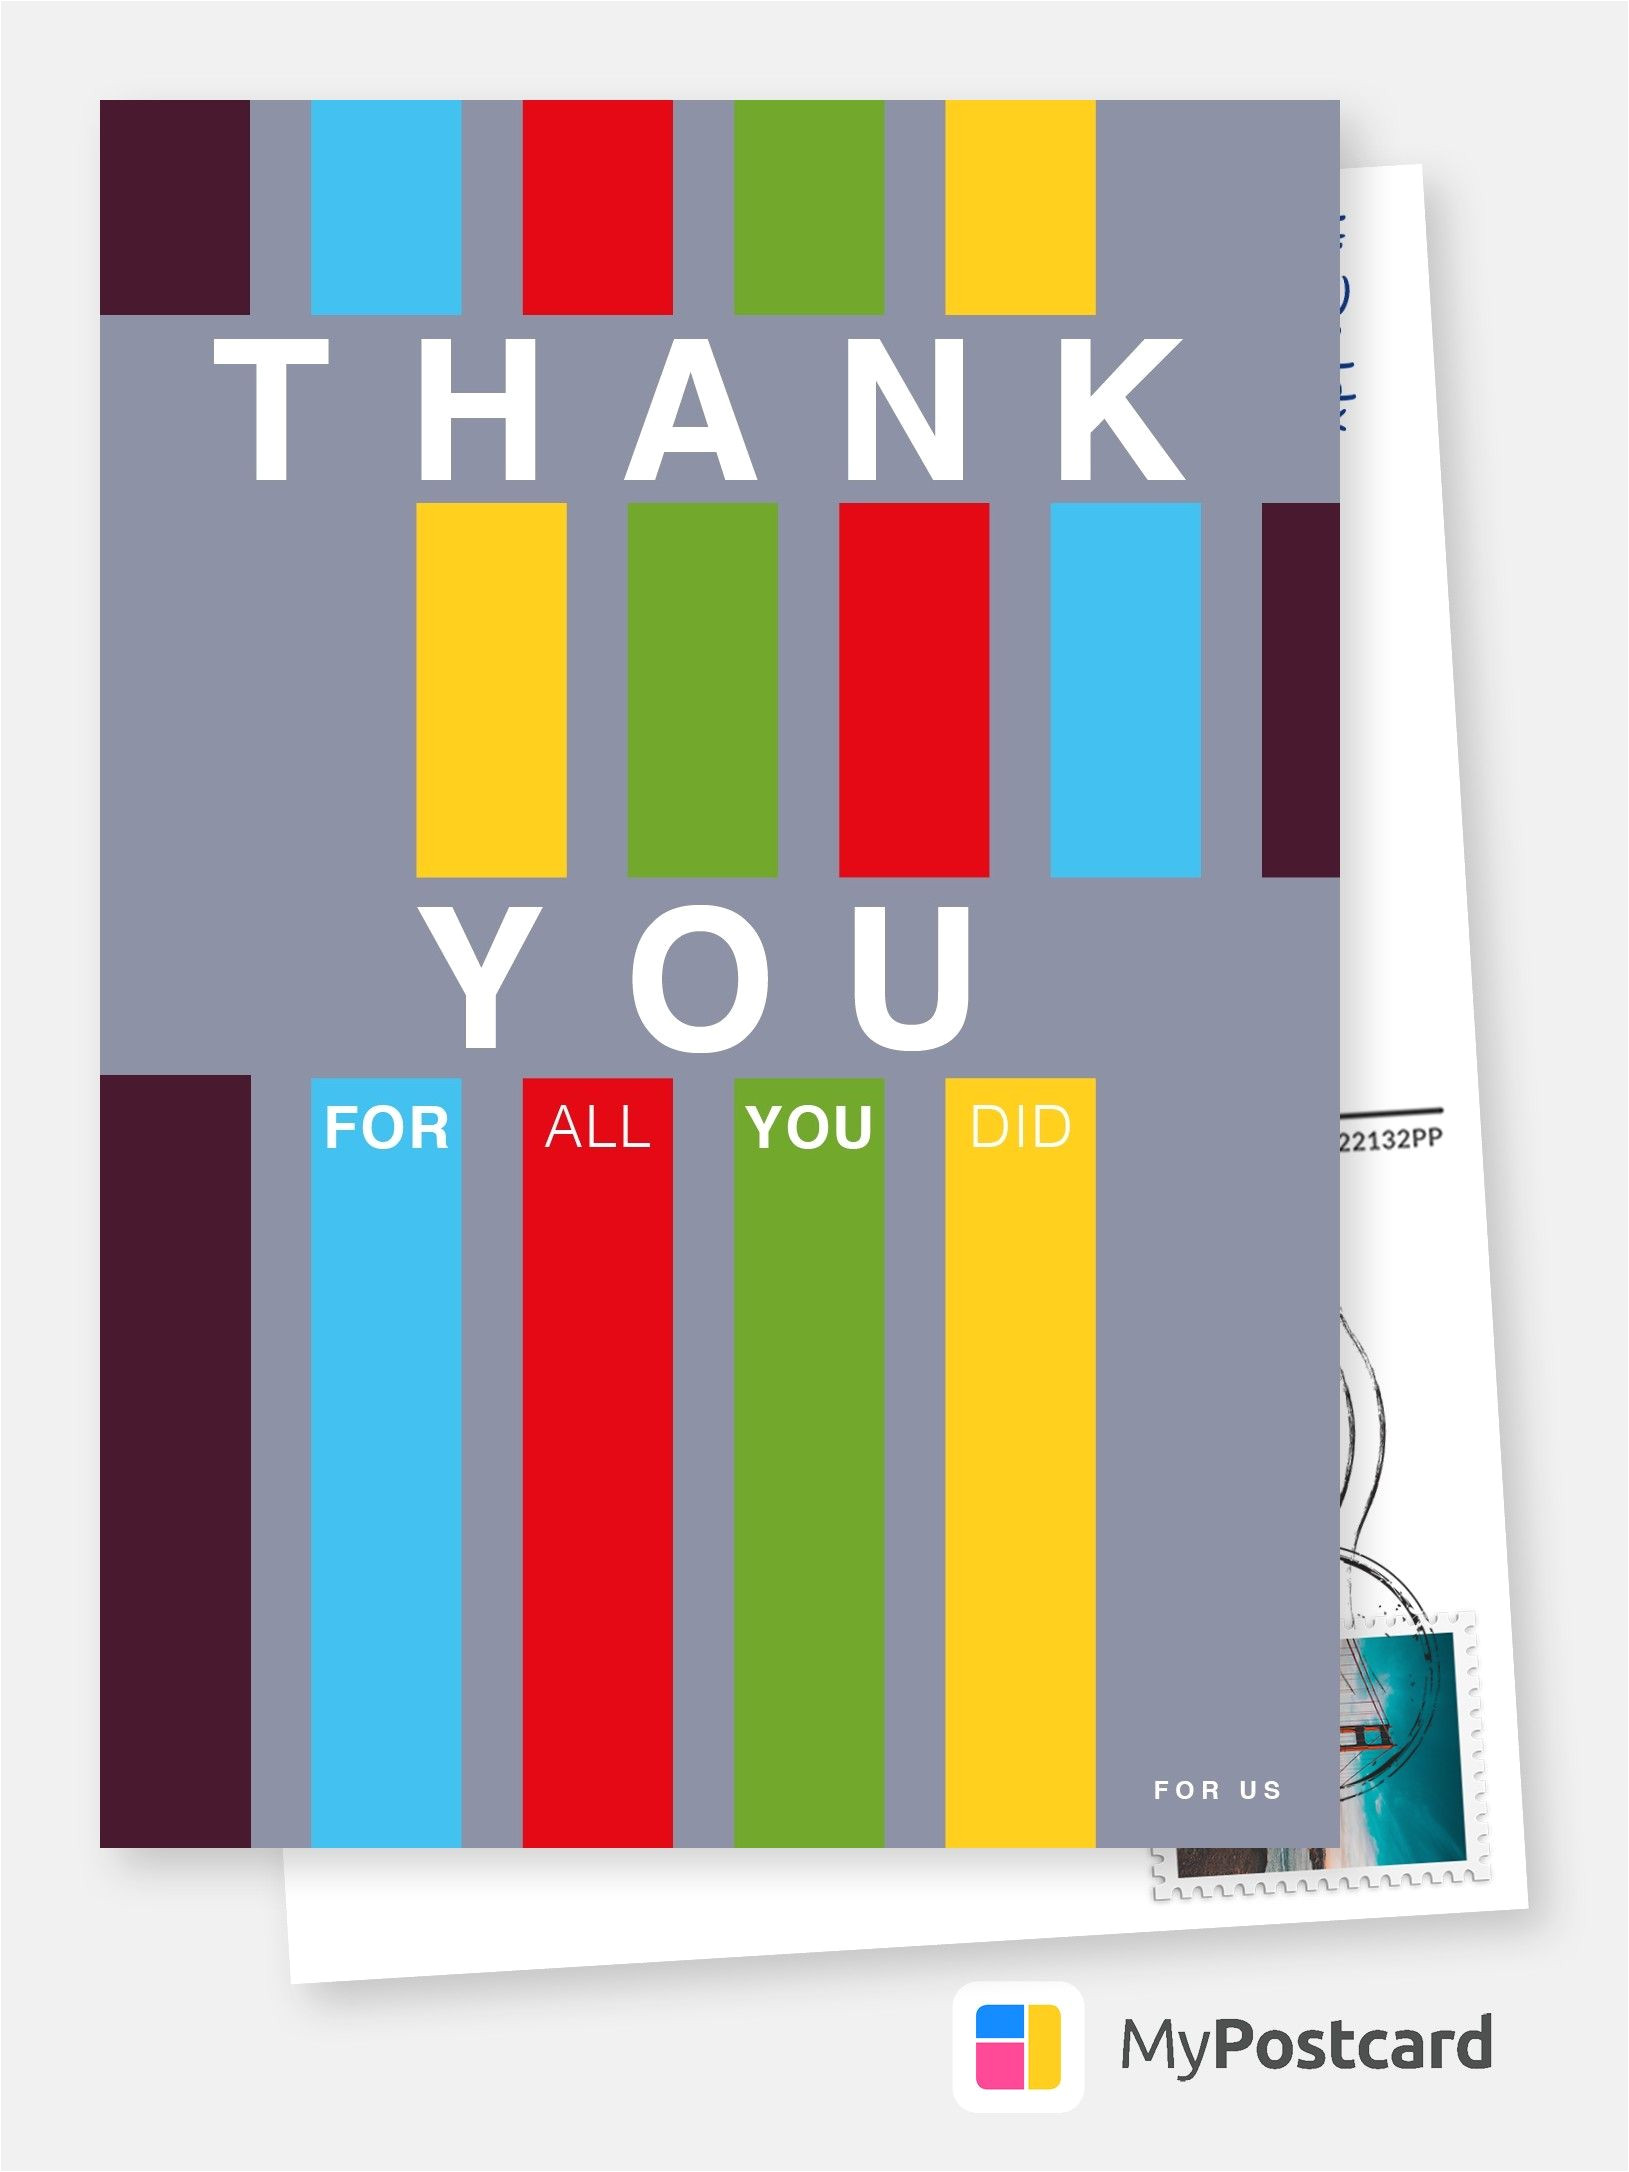 Thank You Greeting Card Messages Thank You for All You Did Ermutigungskarten Spruche